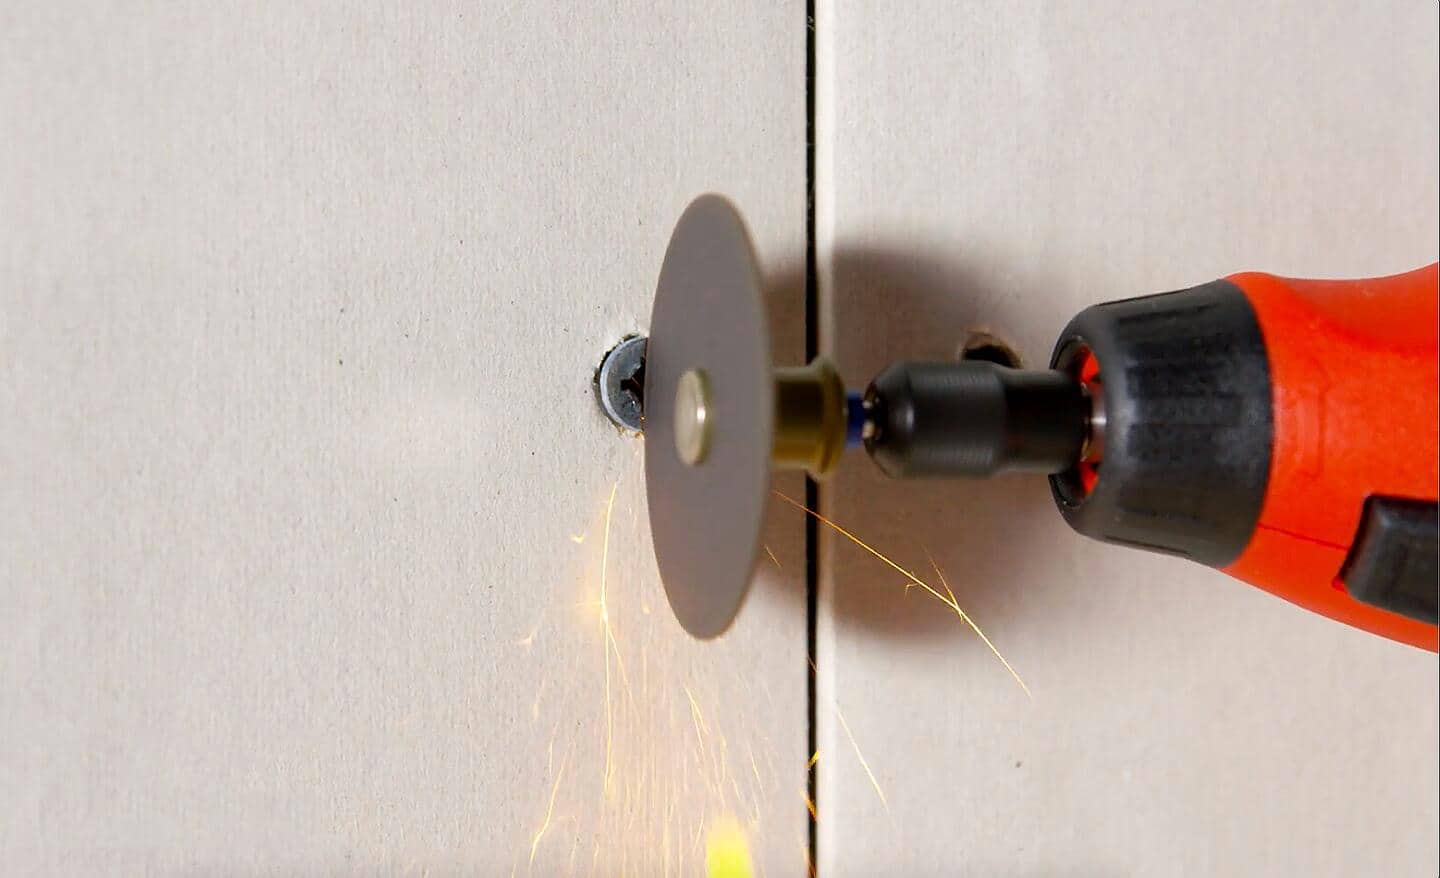 Small saw cutting into a screw in a wall.